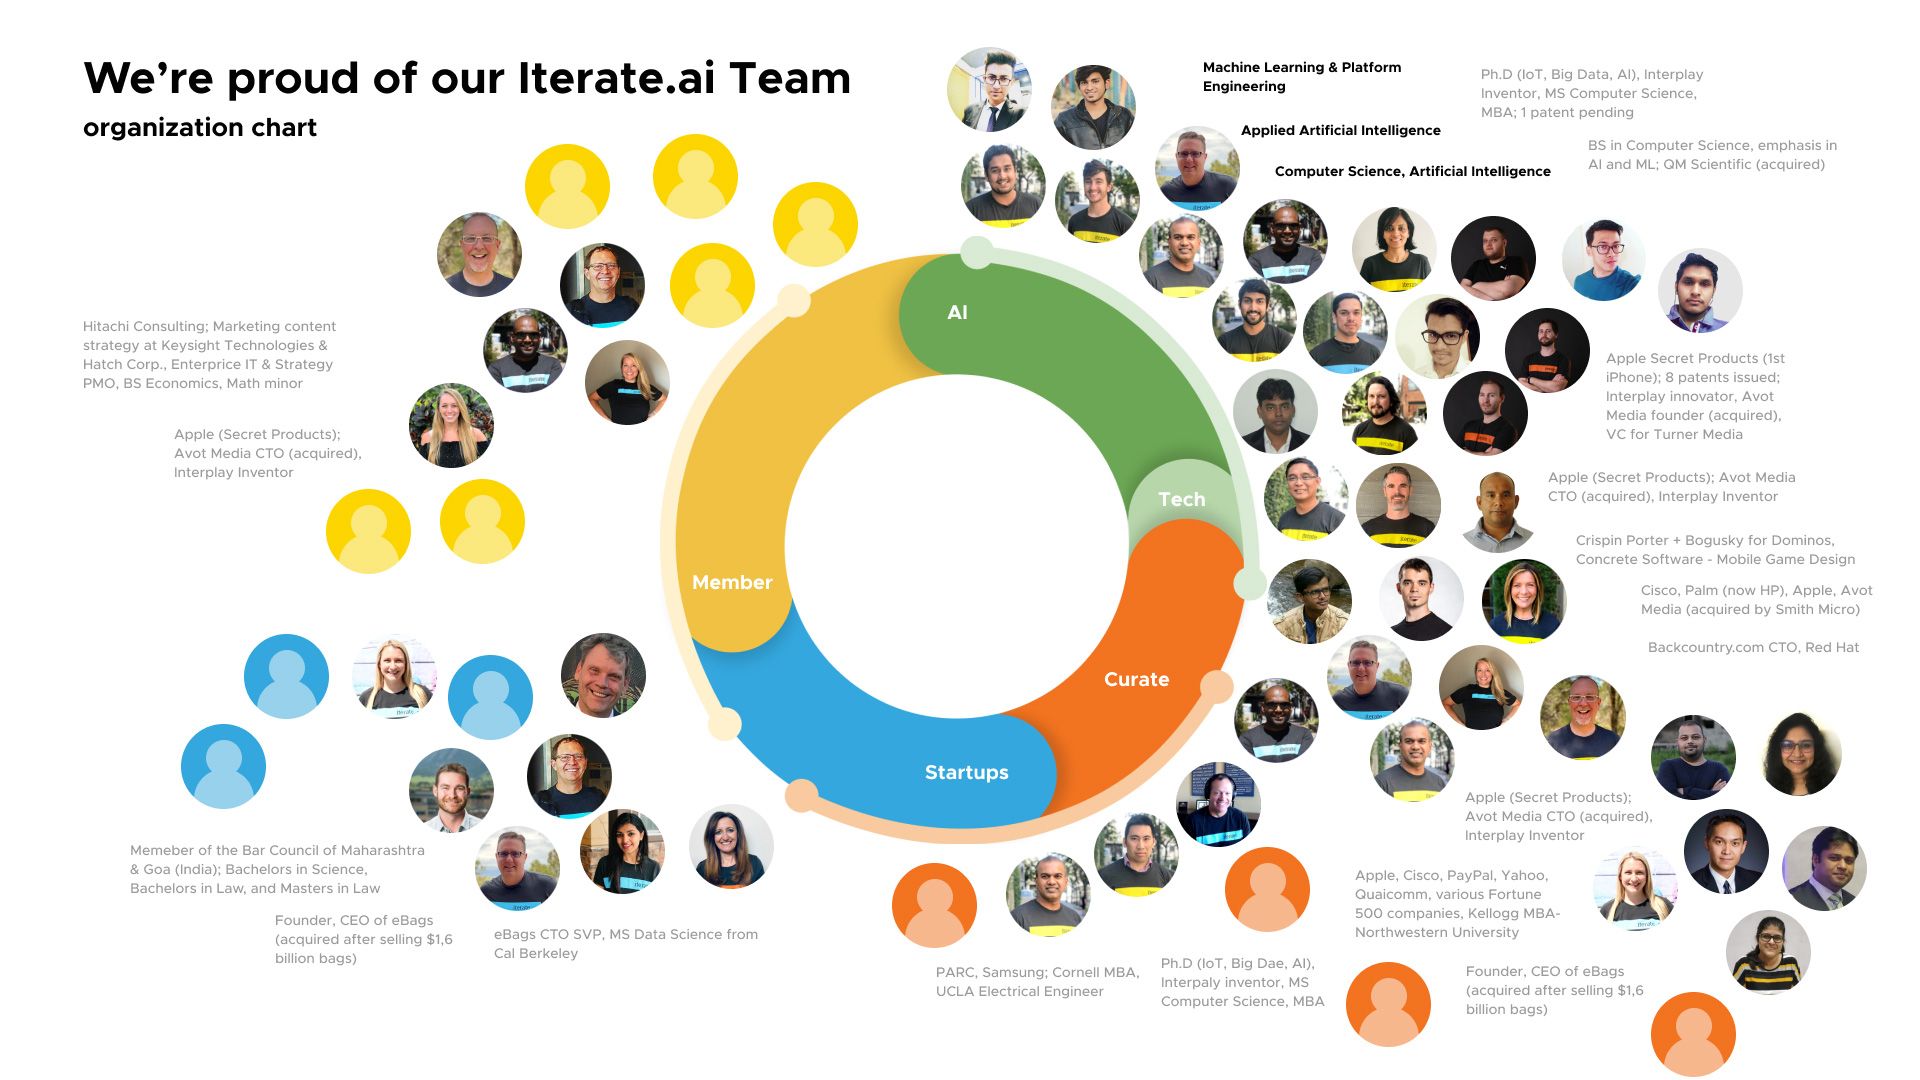 The Iterate.ai Team and organization chart